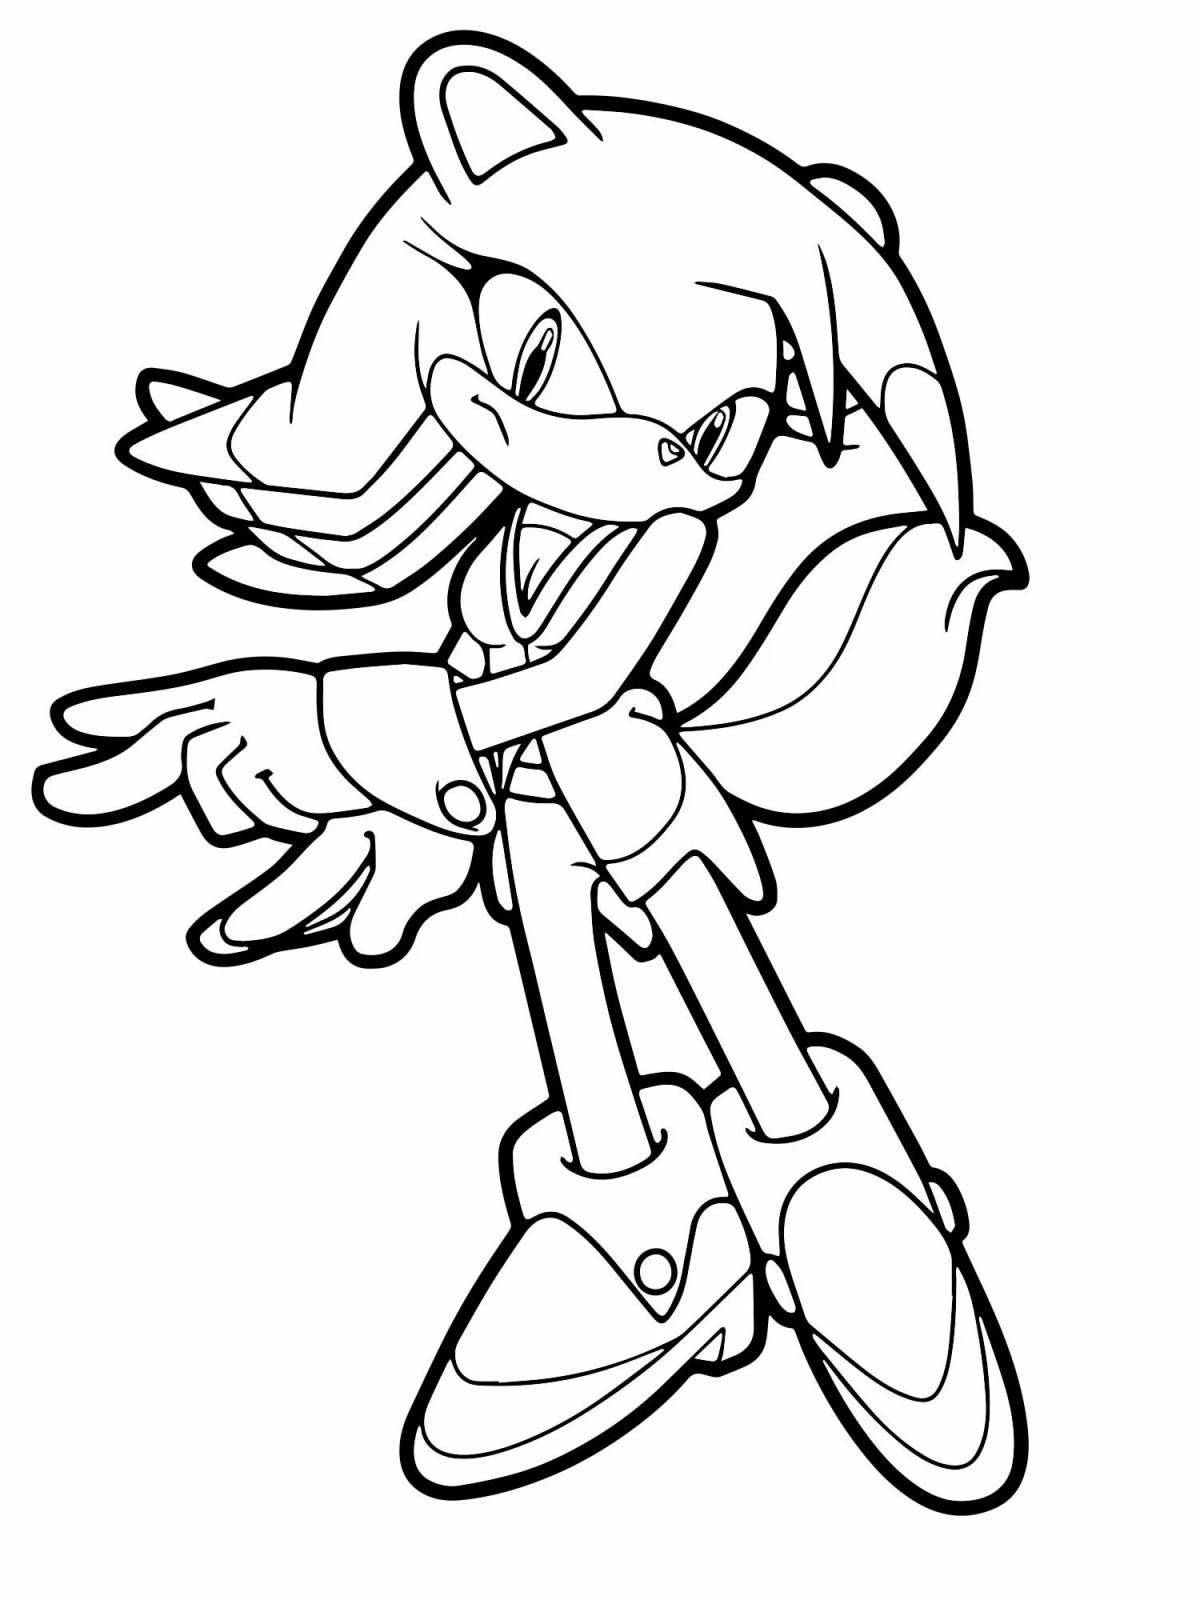 Playful sonic shadow coloring page